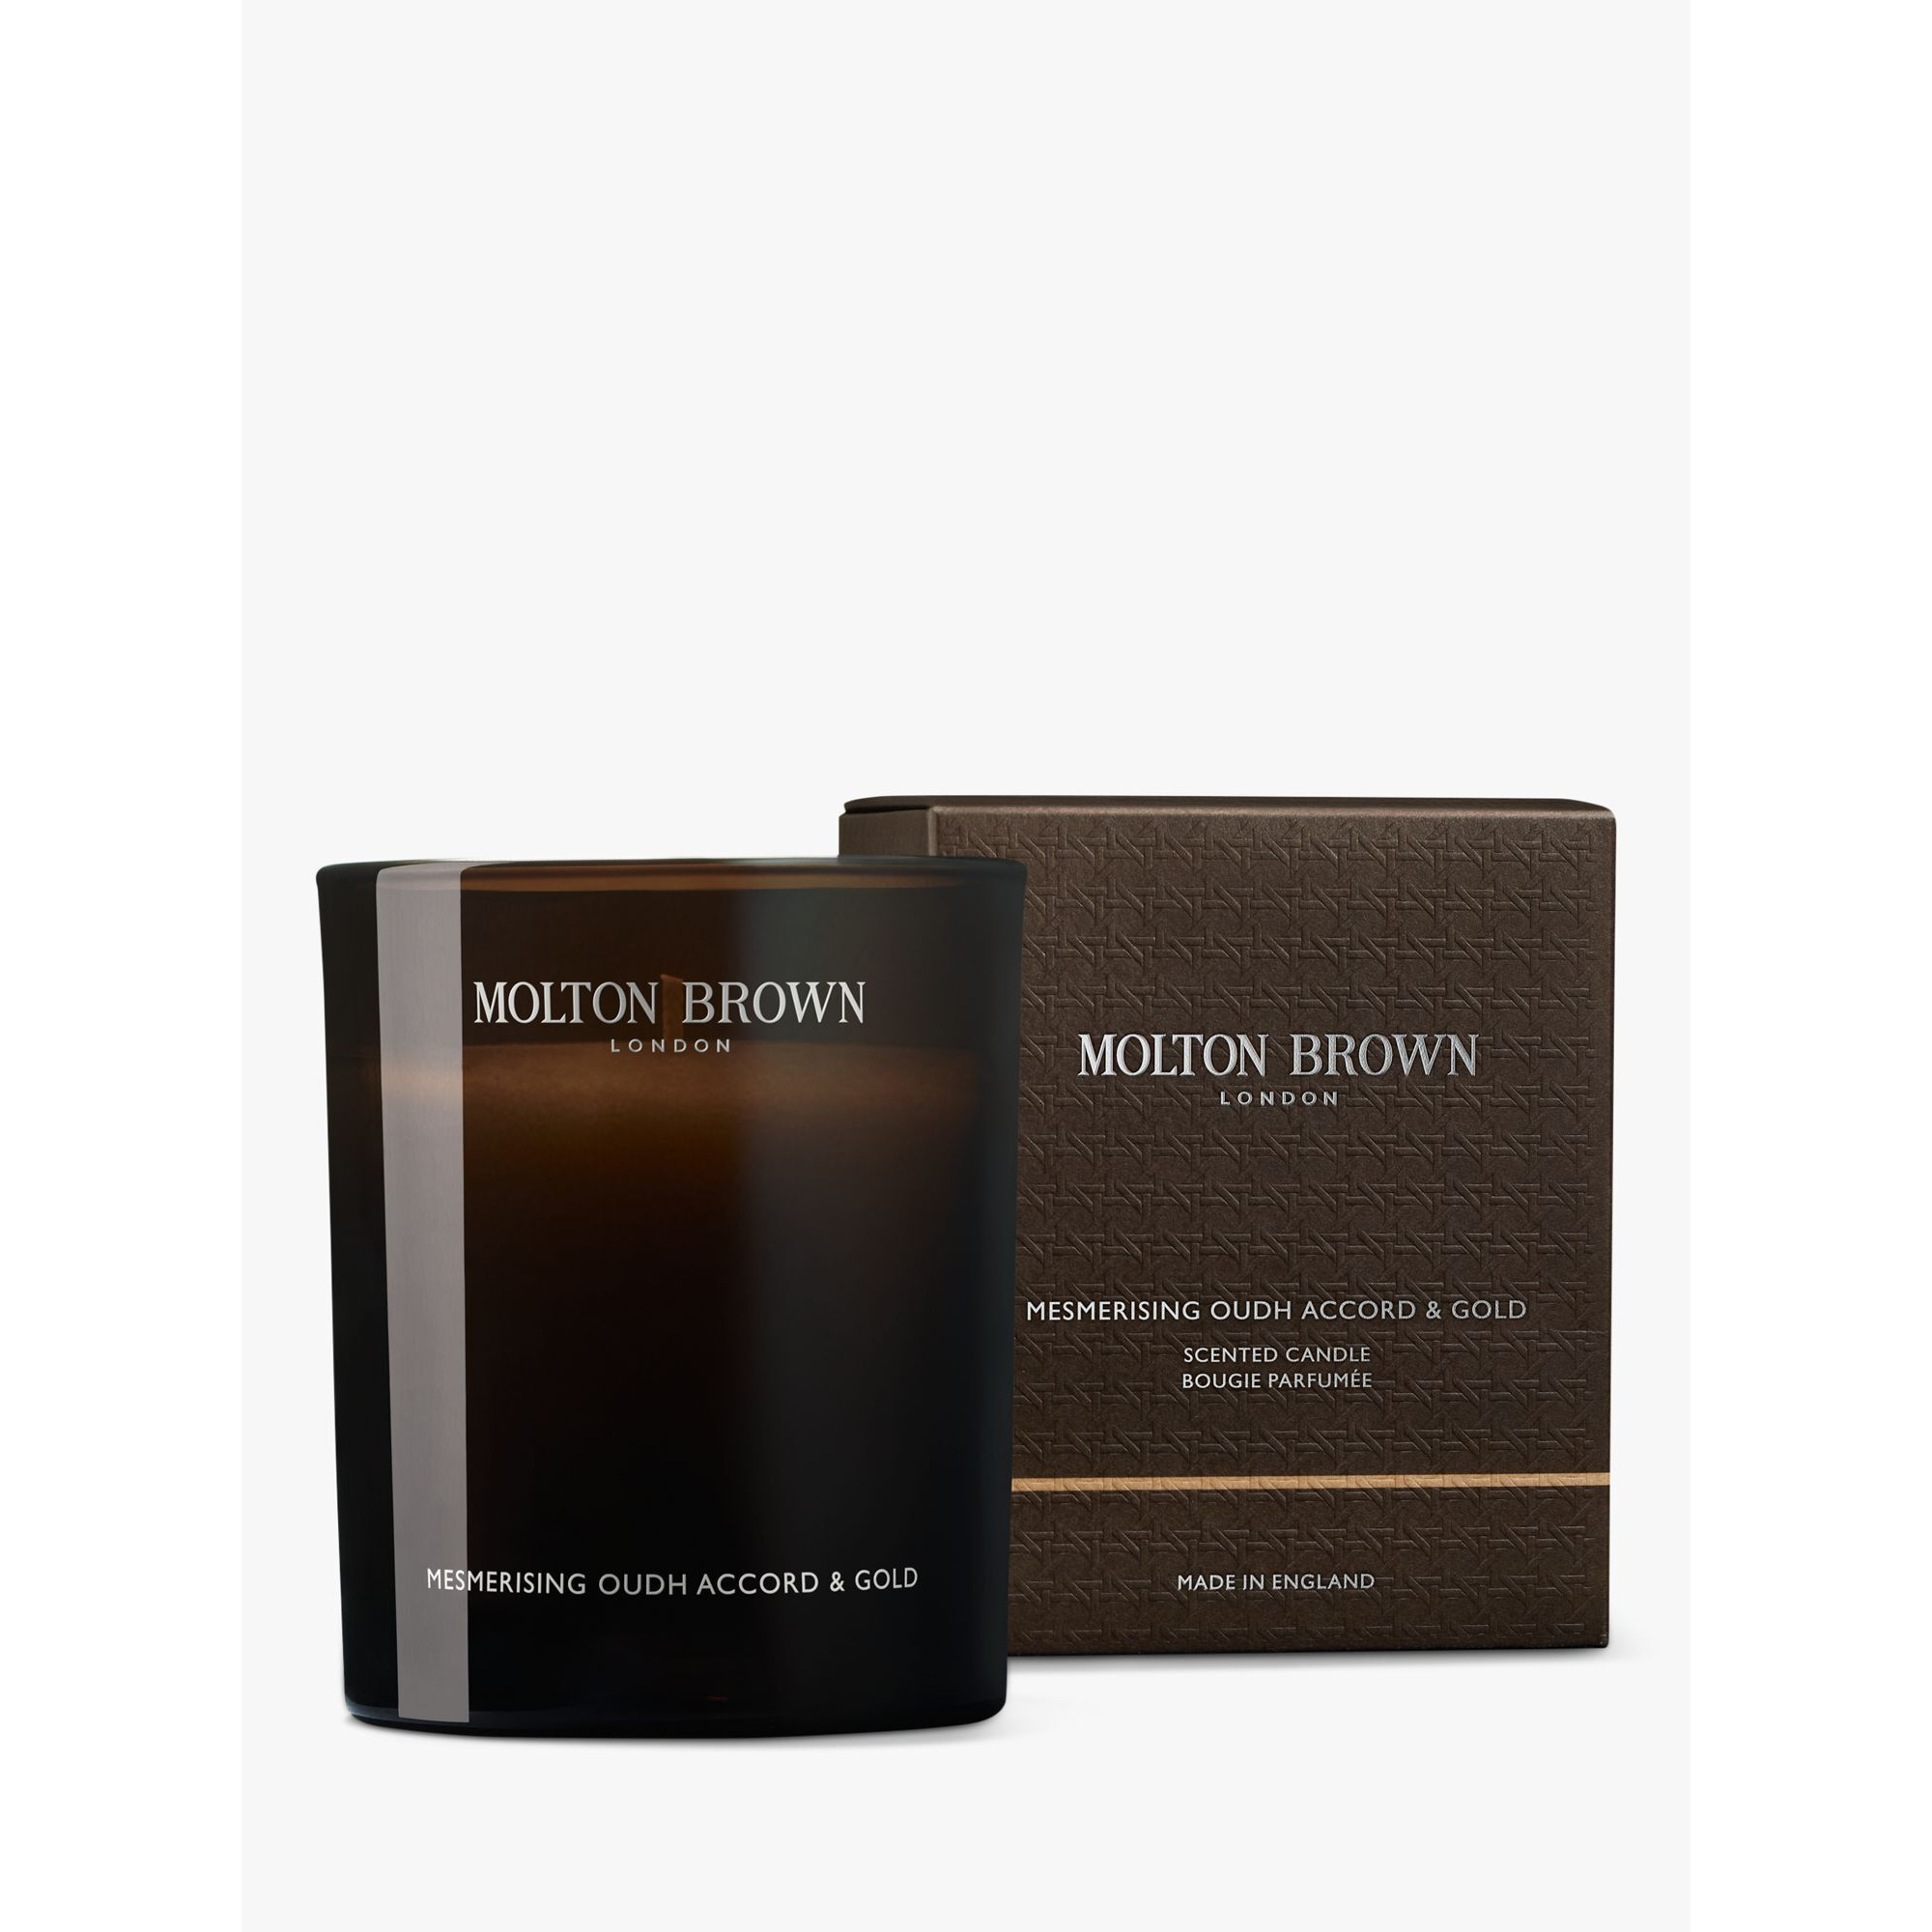 Molton Brown Mesmerising Oudh Accord & Gold Scented Signature Candle, 190g - image 1